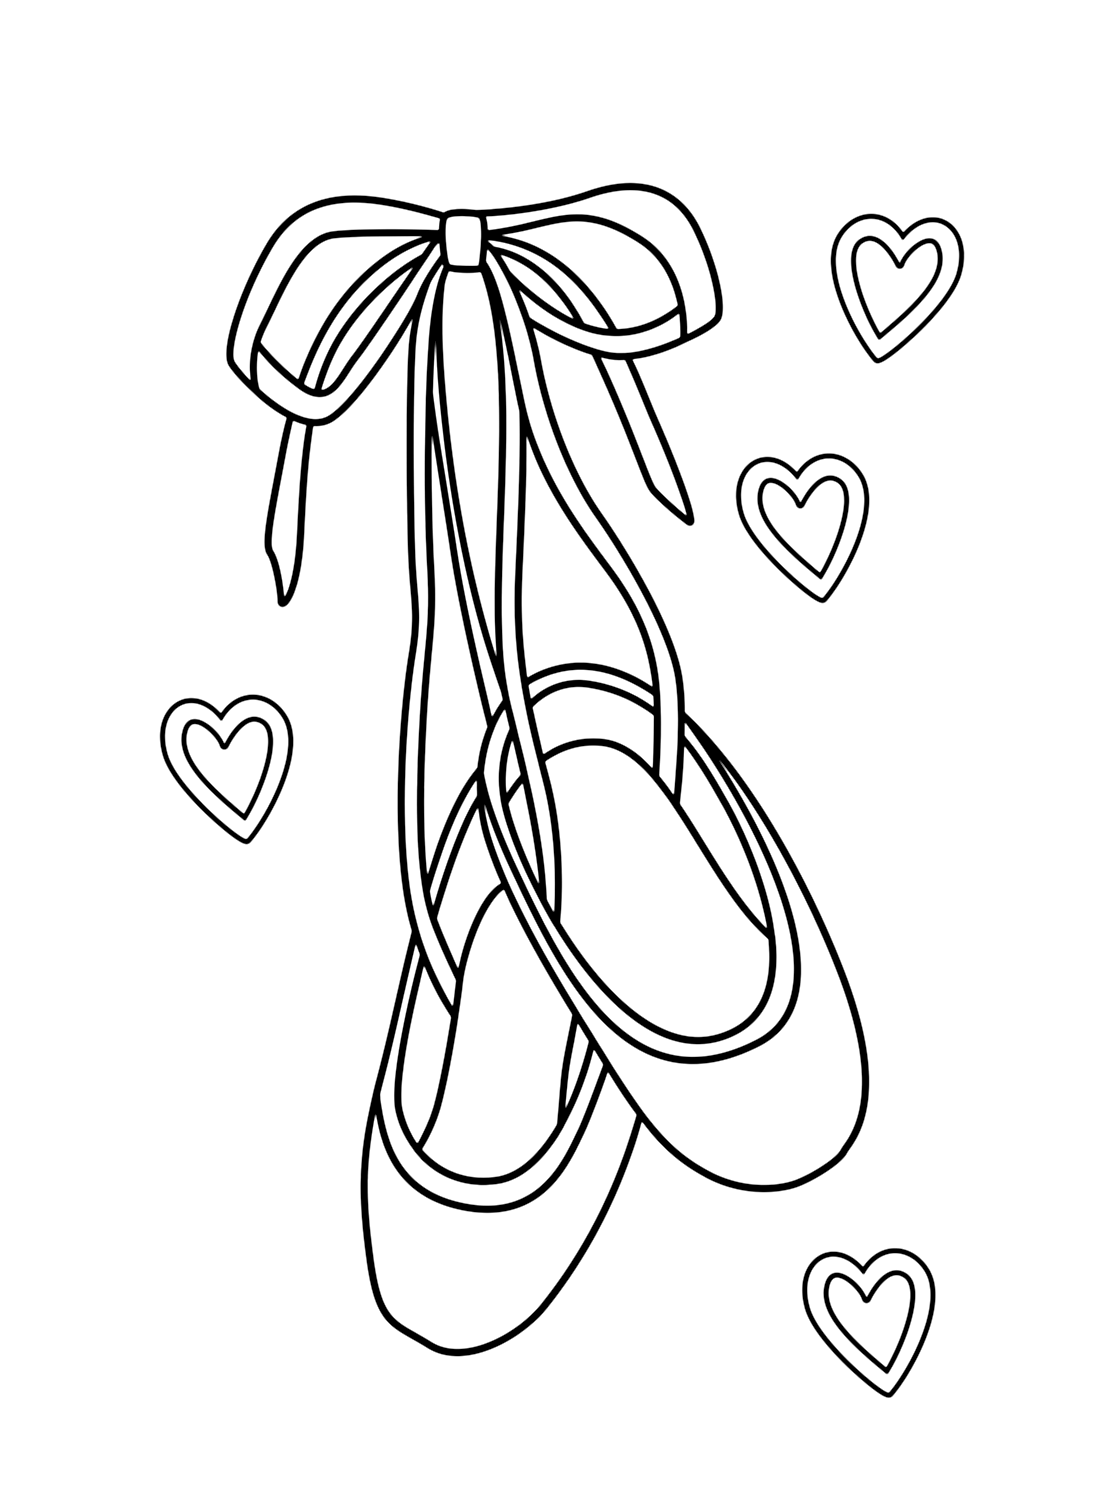 Dancing – shoes coloring page